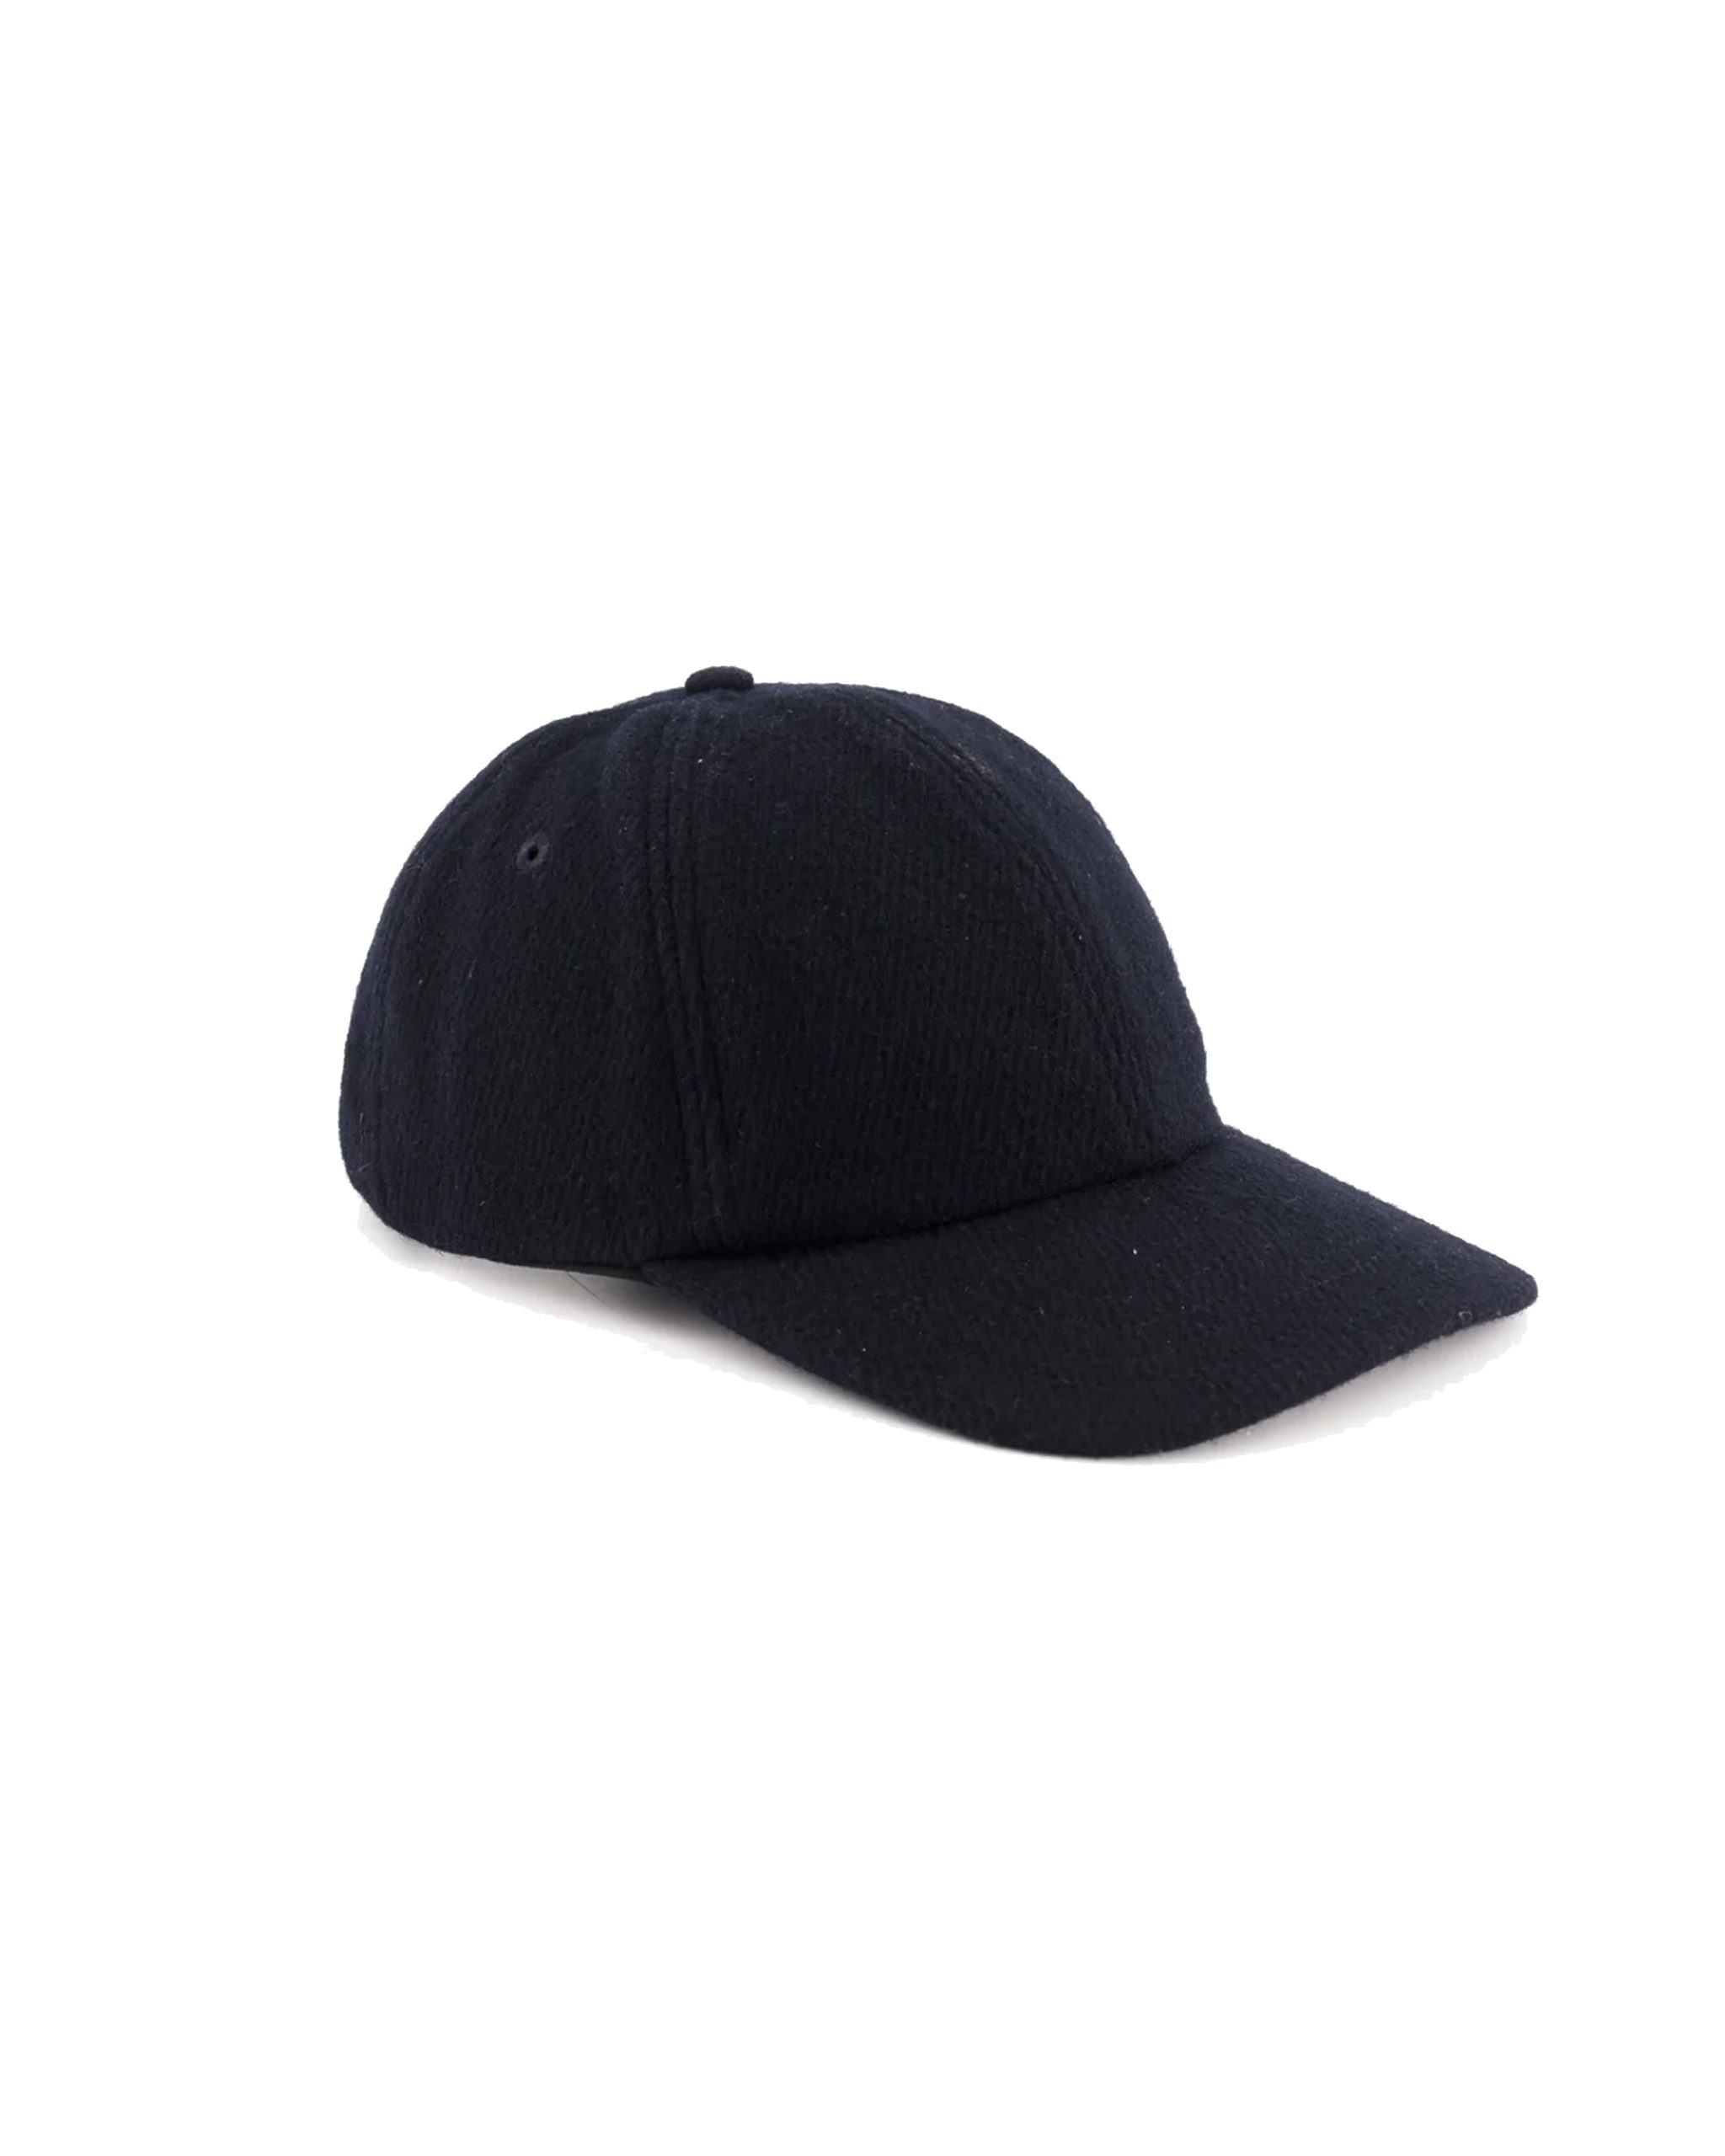 OUTLAND Casquette Archie Wool marine